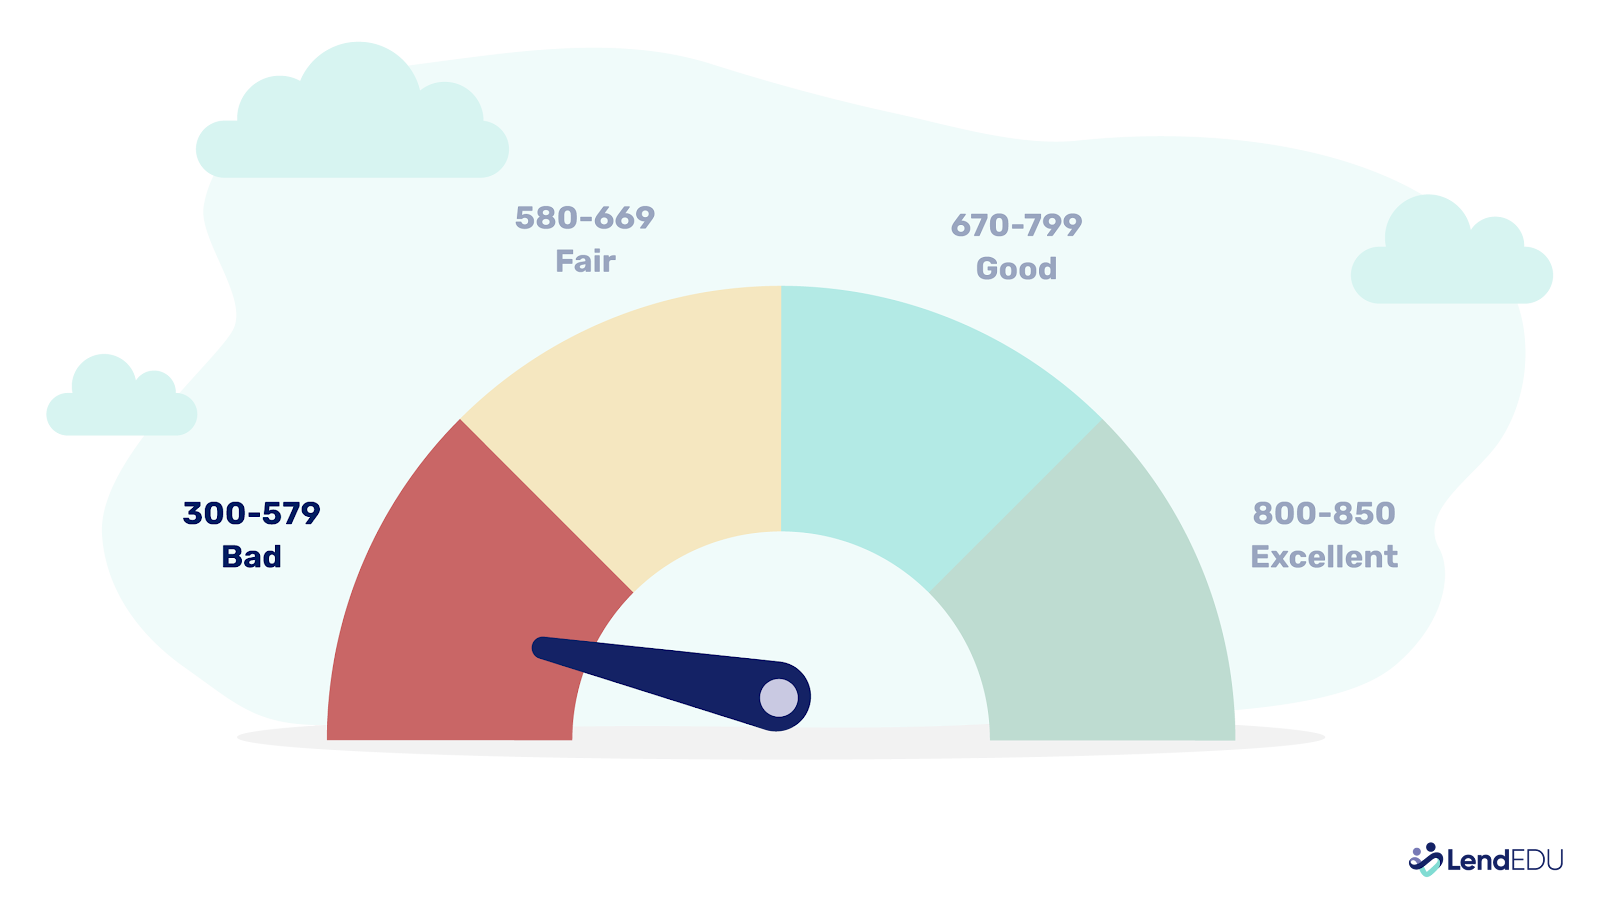 Gauge showing a bad credit score as a range of 300 - 579